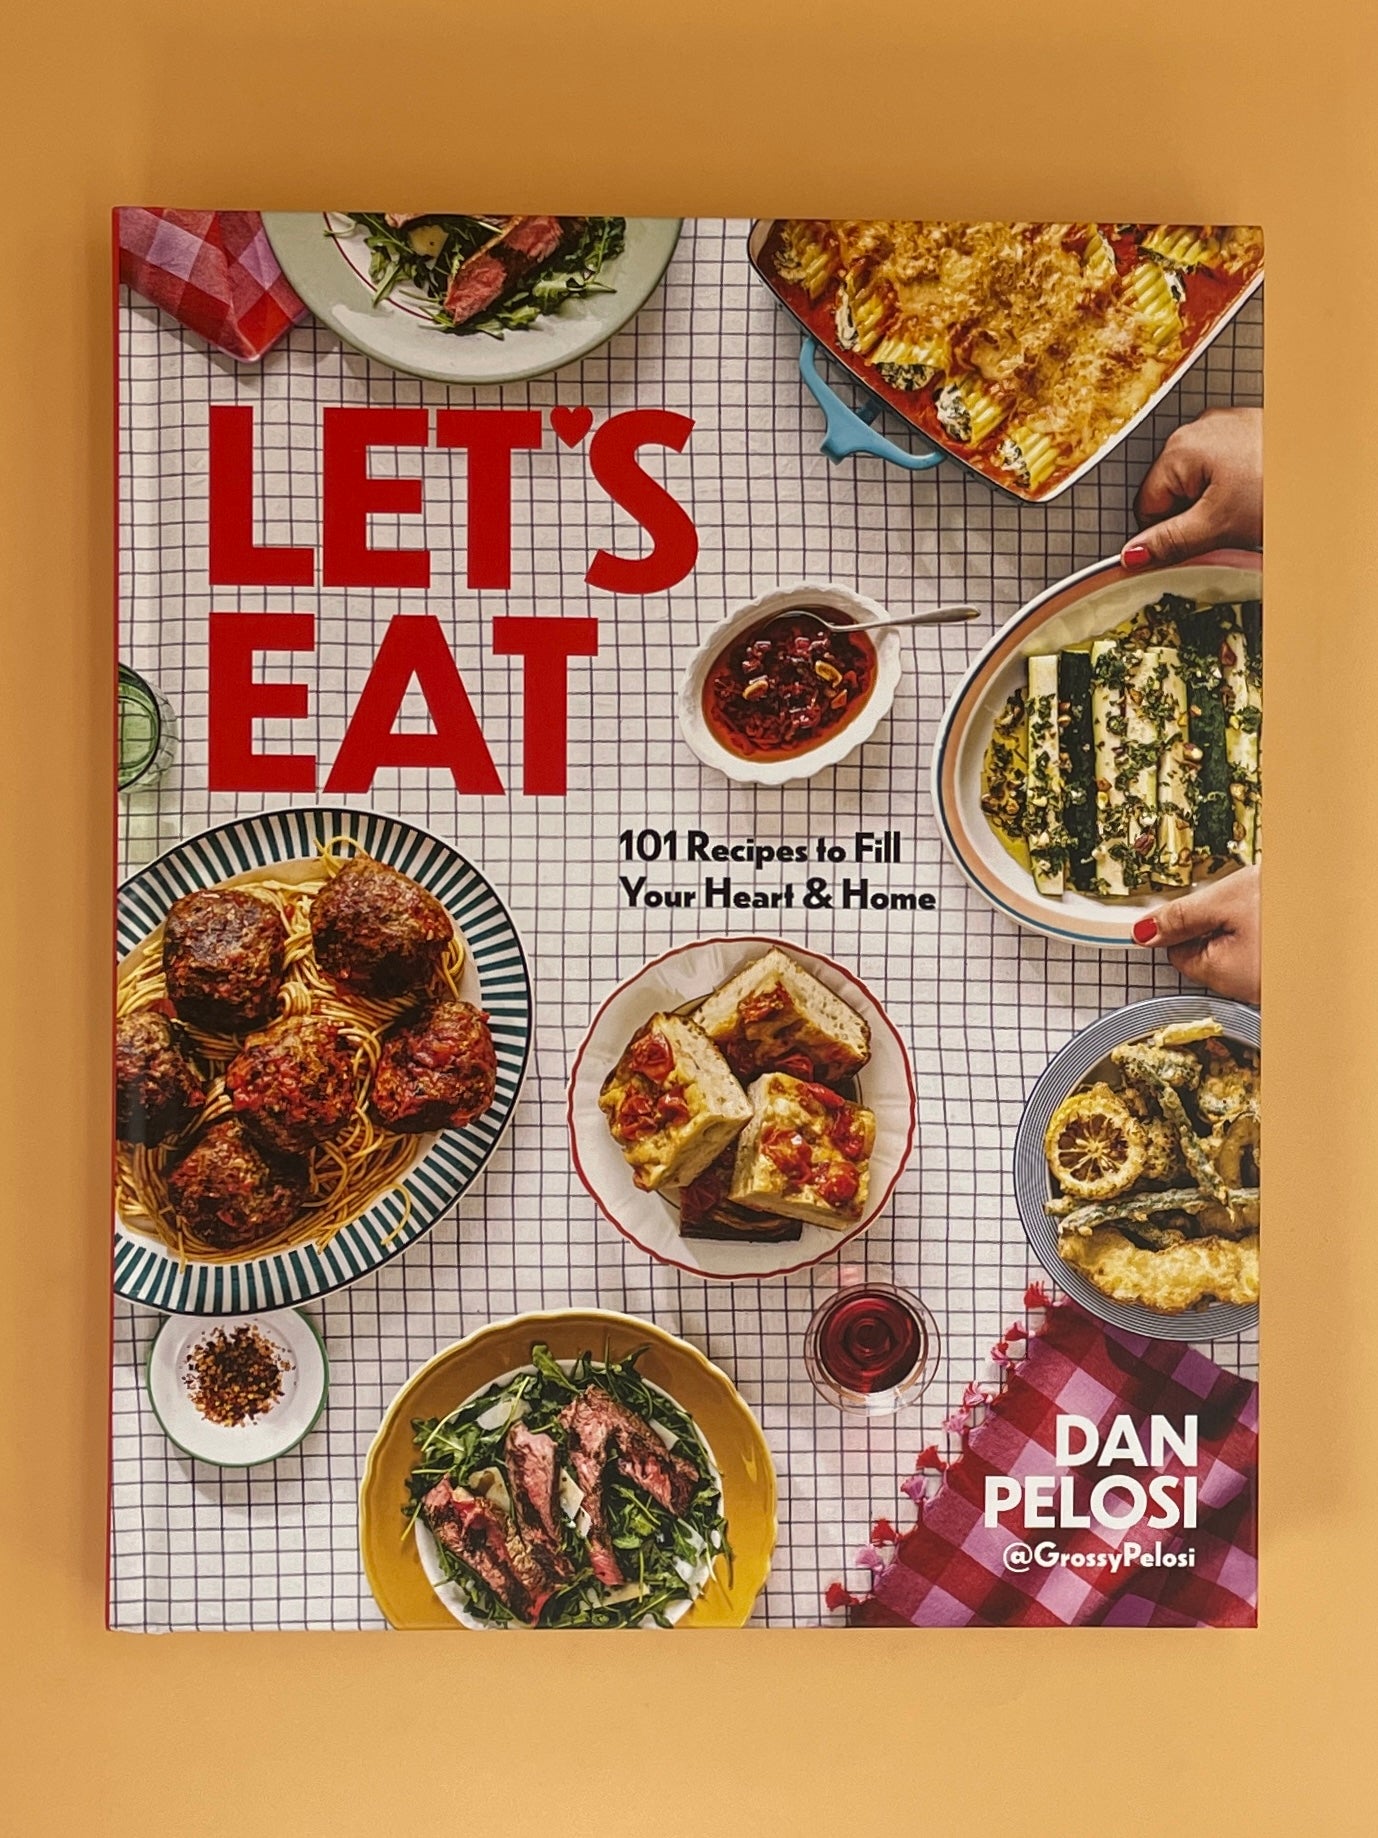 Let's Eat: 101 Recipes to Fill Your Heart & Home (Dan Pelosi)